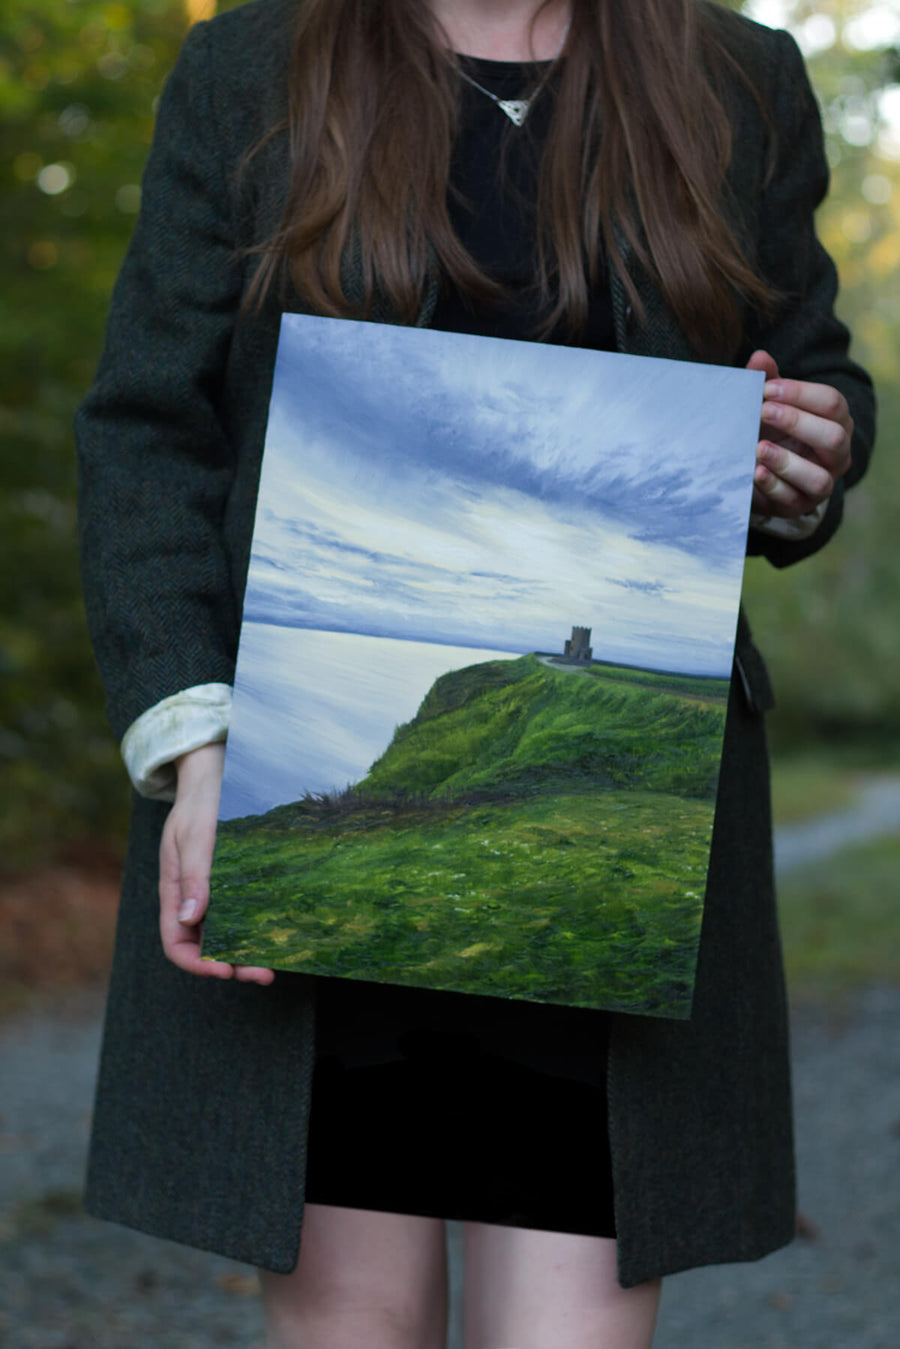 Limited Edition Print - O'Brian's Tower at the Cliffs of Moher